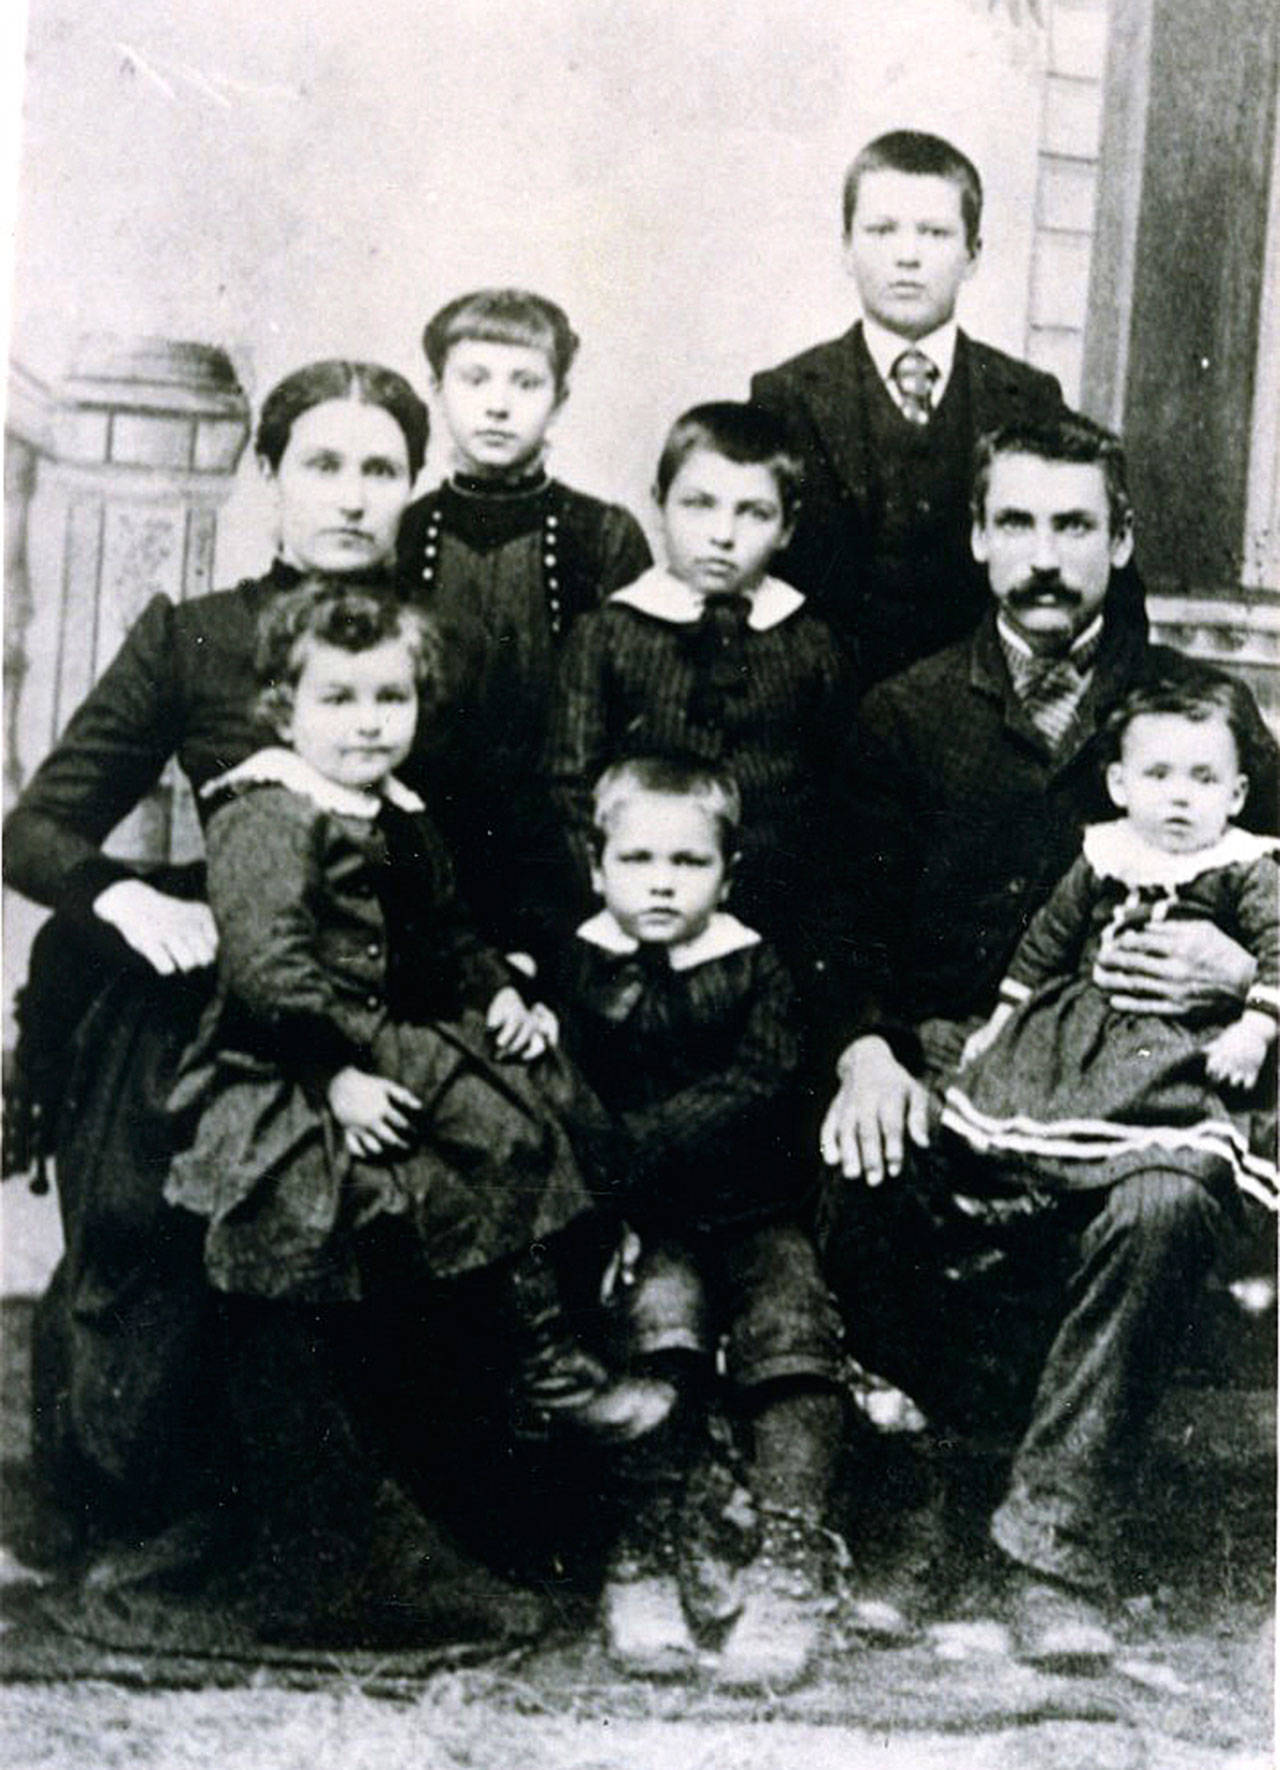 Mark Wilson’s family lived near Brinnon 1890s. The family’s homestead was about 6 miles upriver from Brinnon. Shown are Wilson, middle right, with his wife, Margaret, middle left. Children Alice and Henry are in back while Arthur stands between his parents, and Rollo, James and Edward are in front. (Jefferson County Historical Society)